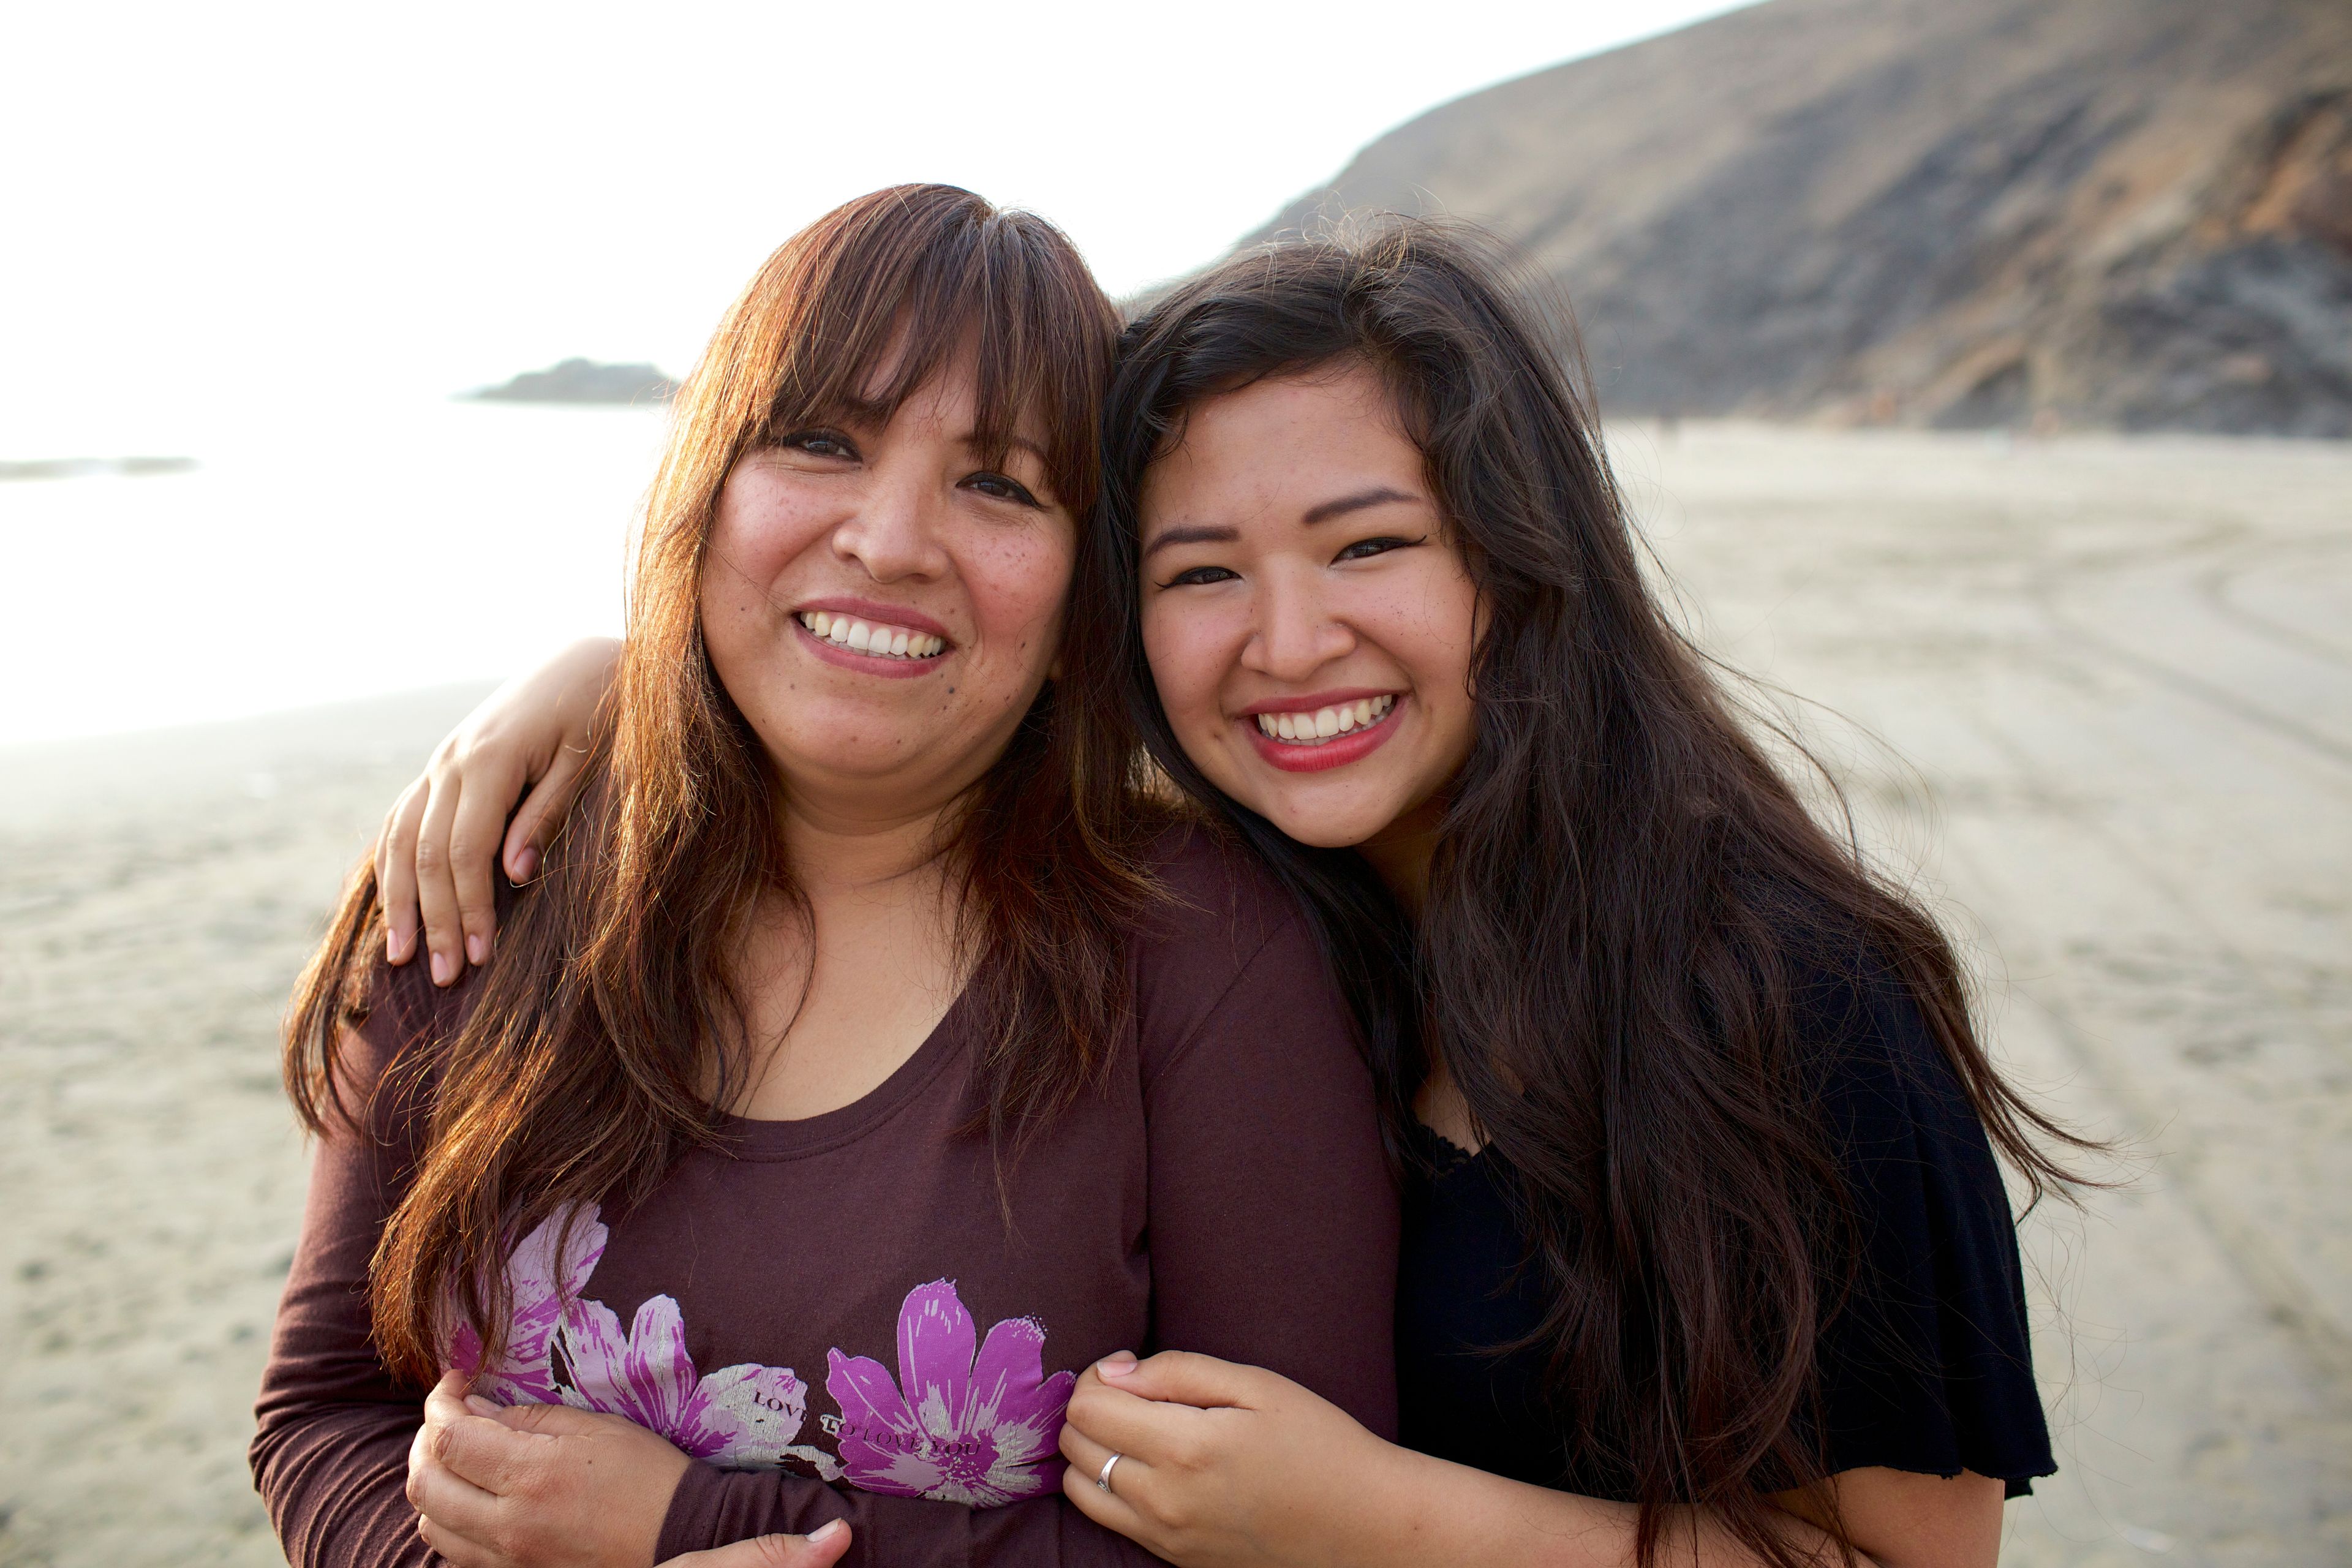 A mother poses with her daughter on the beach.